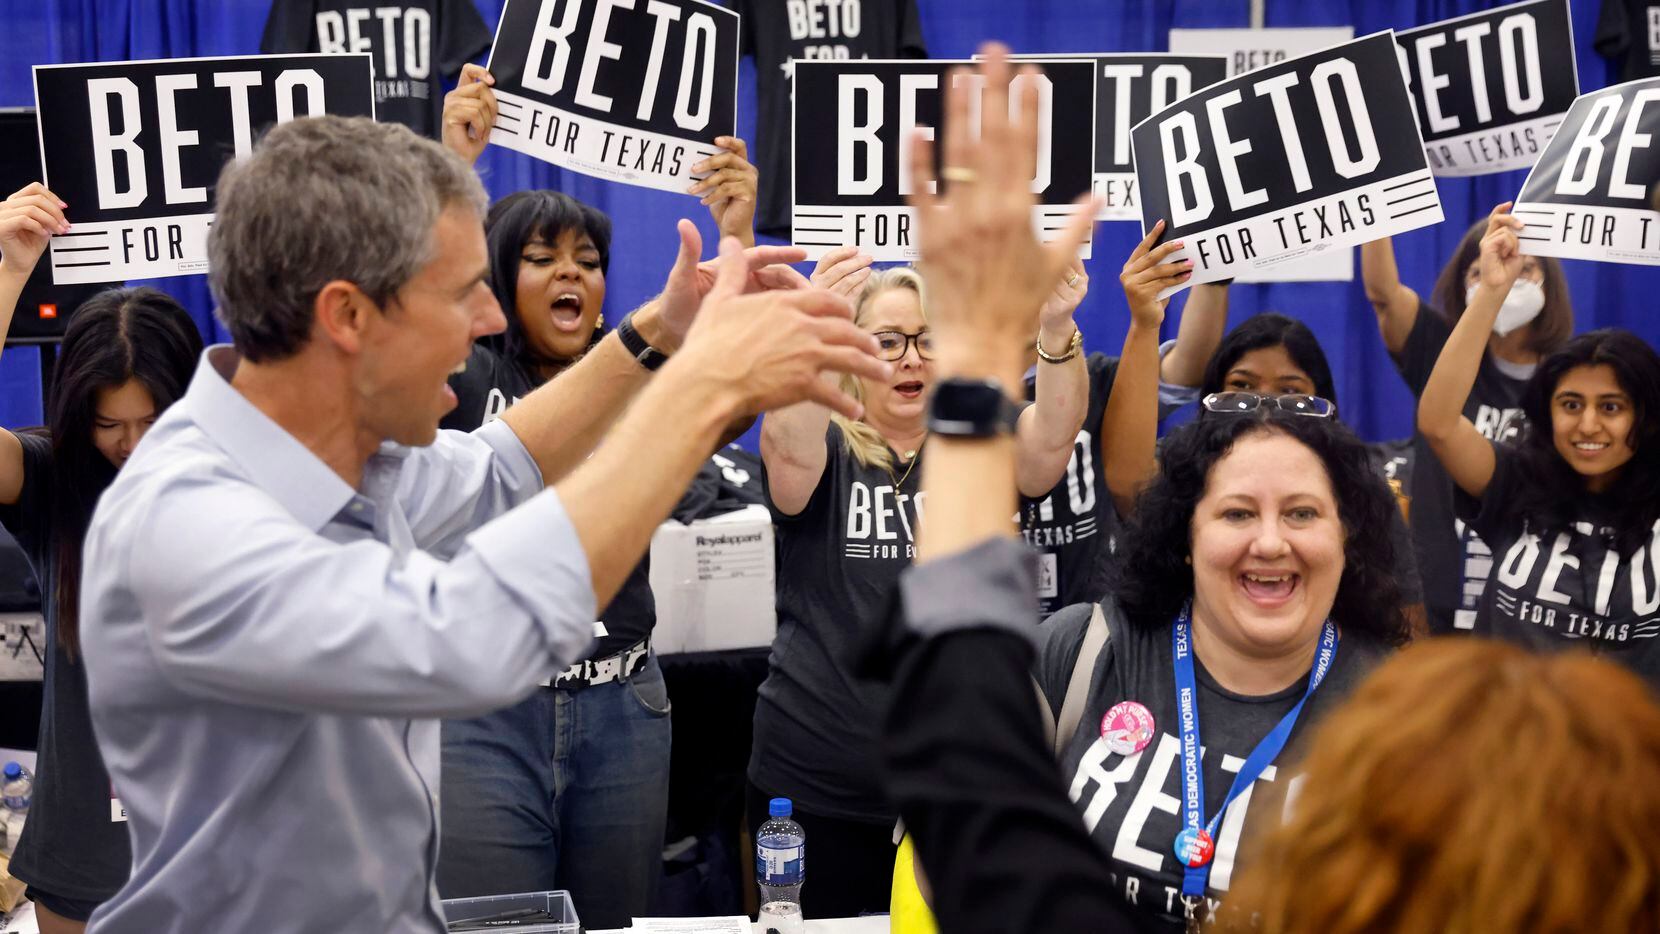 Democratic gubernatorial challenger Beto O'Rourke cheers supporters as they took photos with...